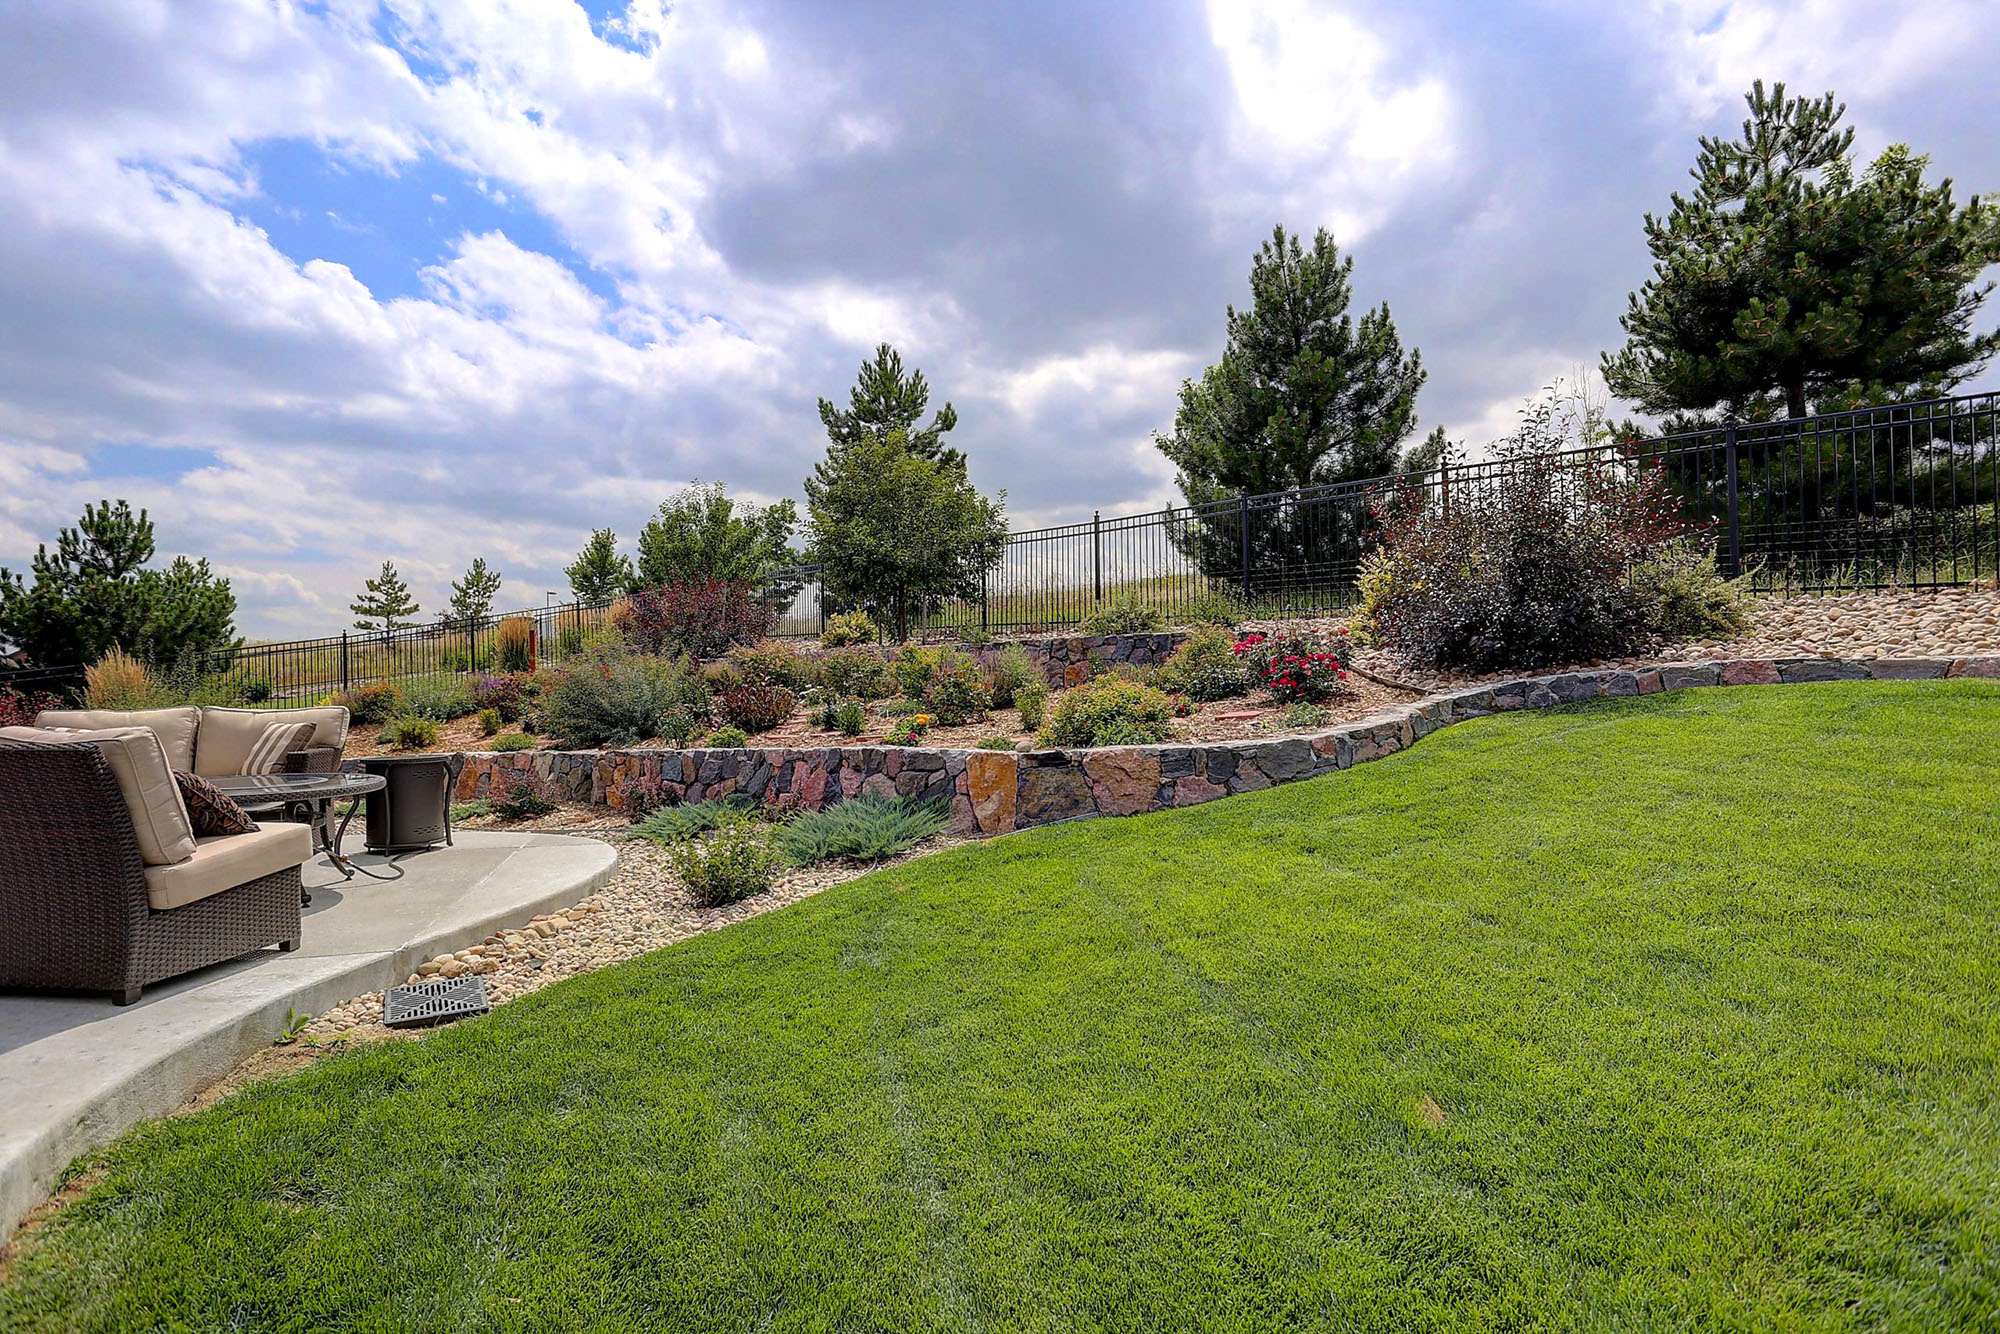 Fire-resistant landscape for the Bay Area